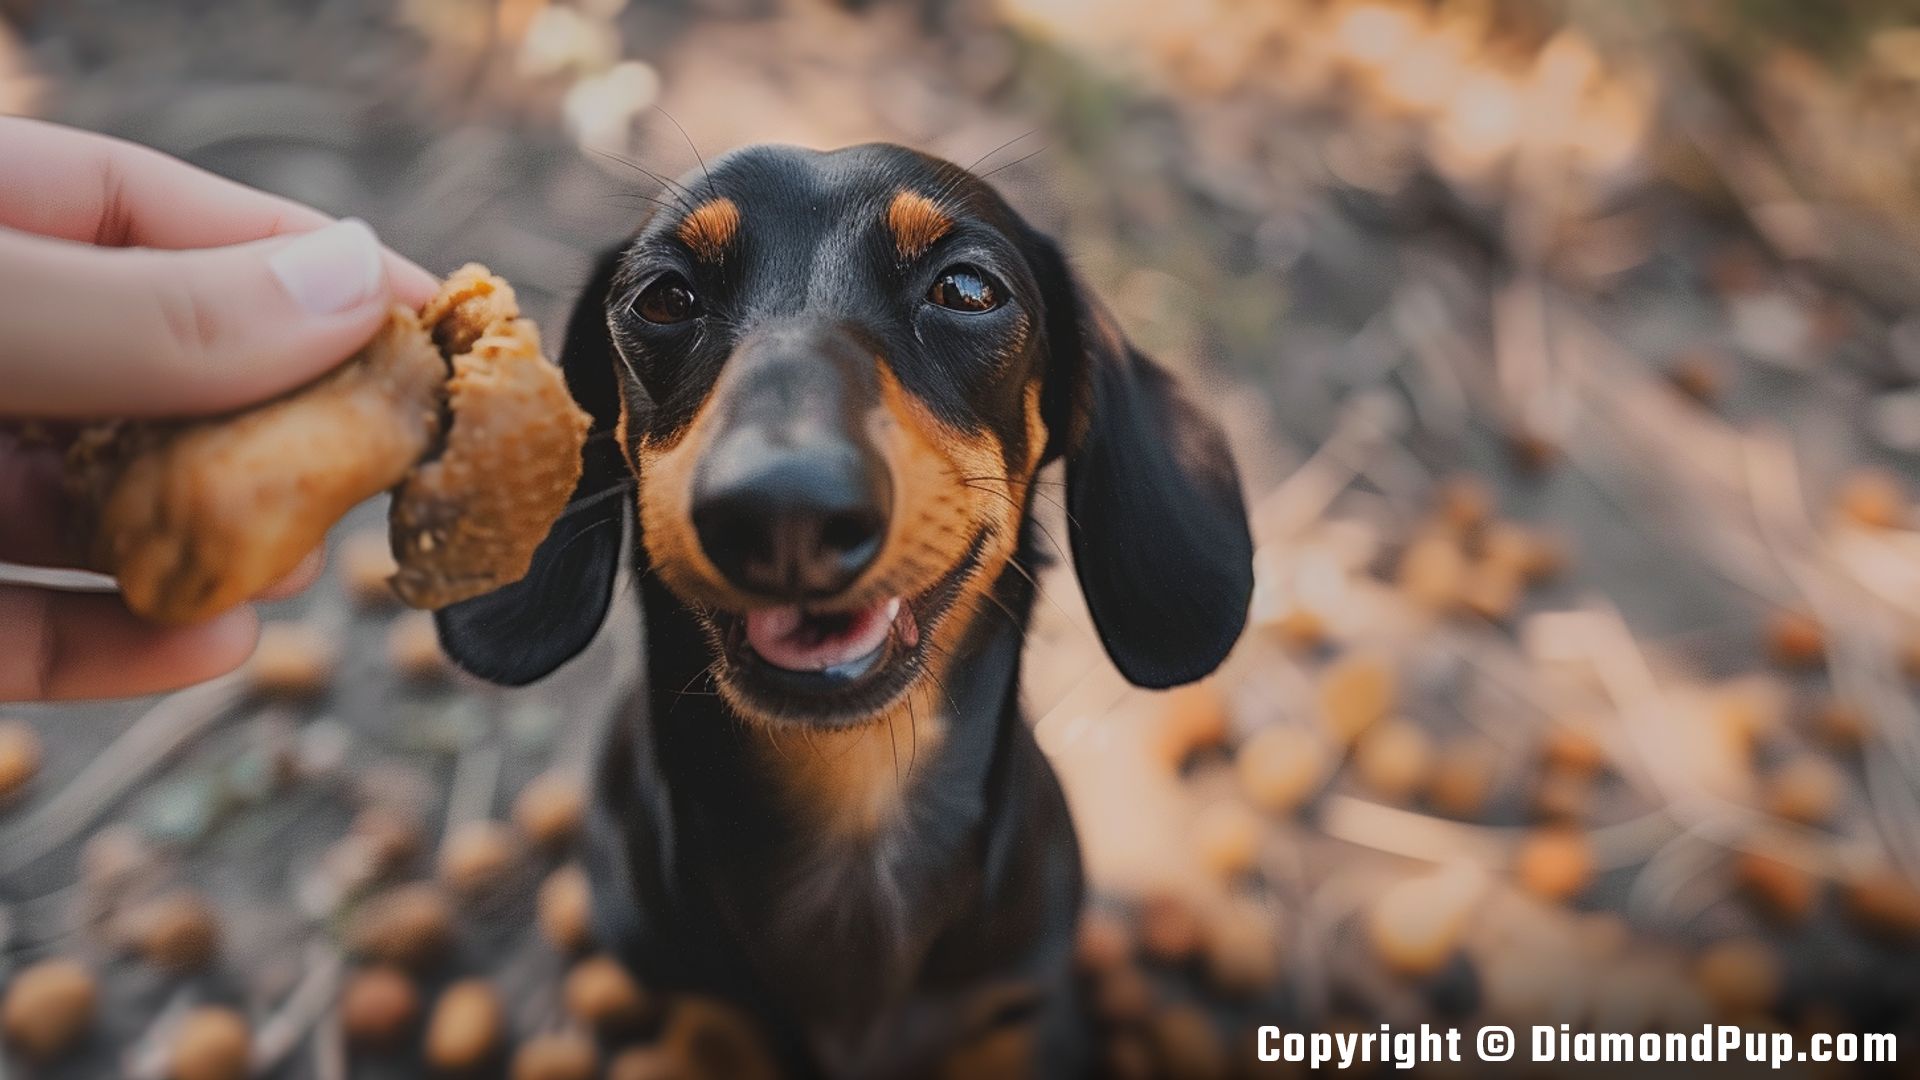 Photograph of Dachshund Snacking on Chicken